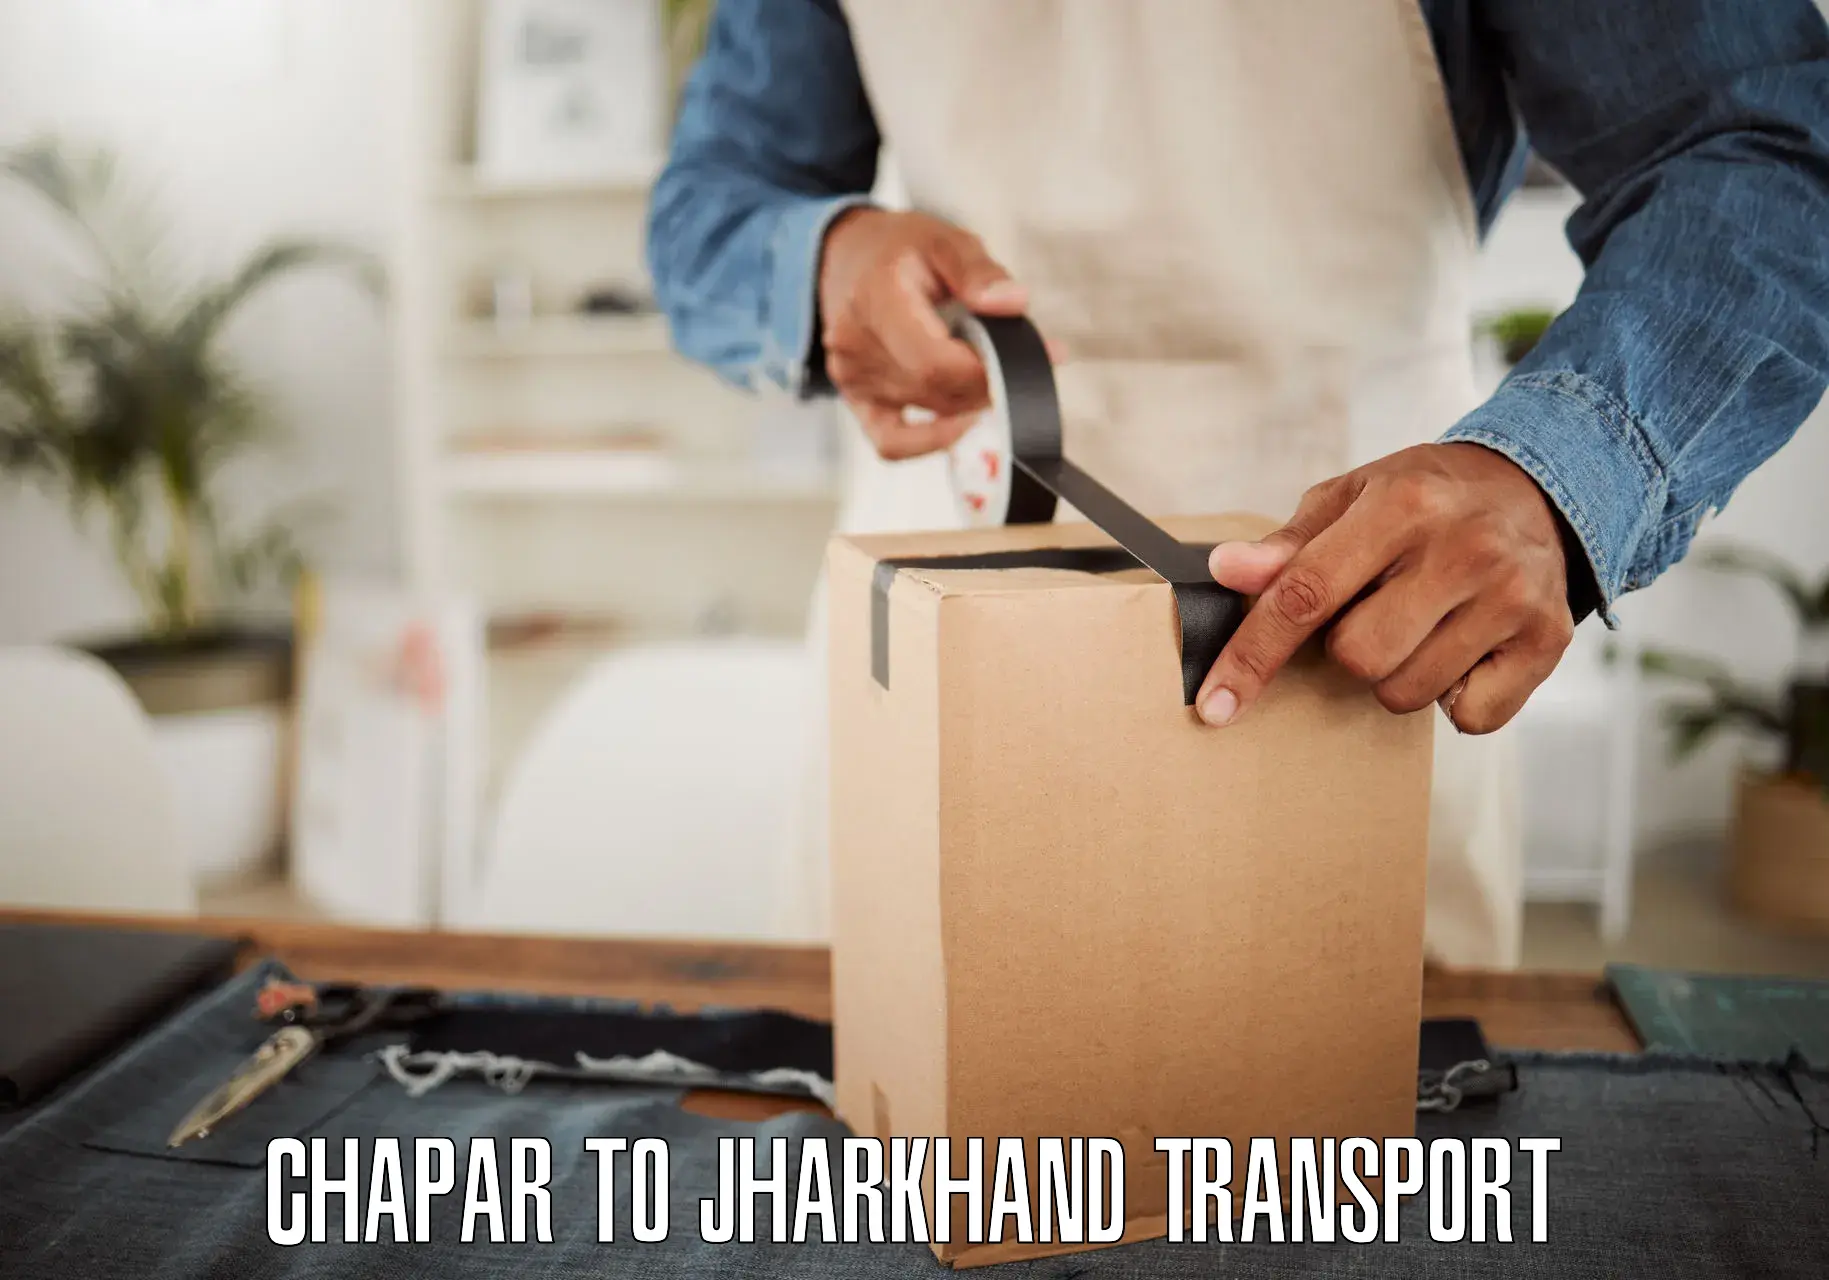 Container transport service Chapar to Chaibasa